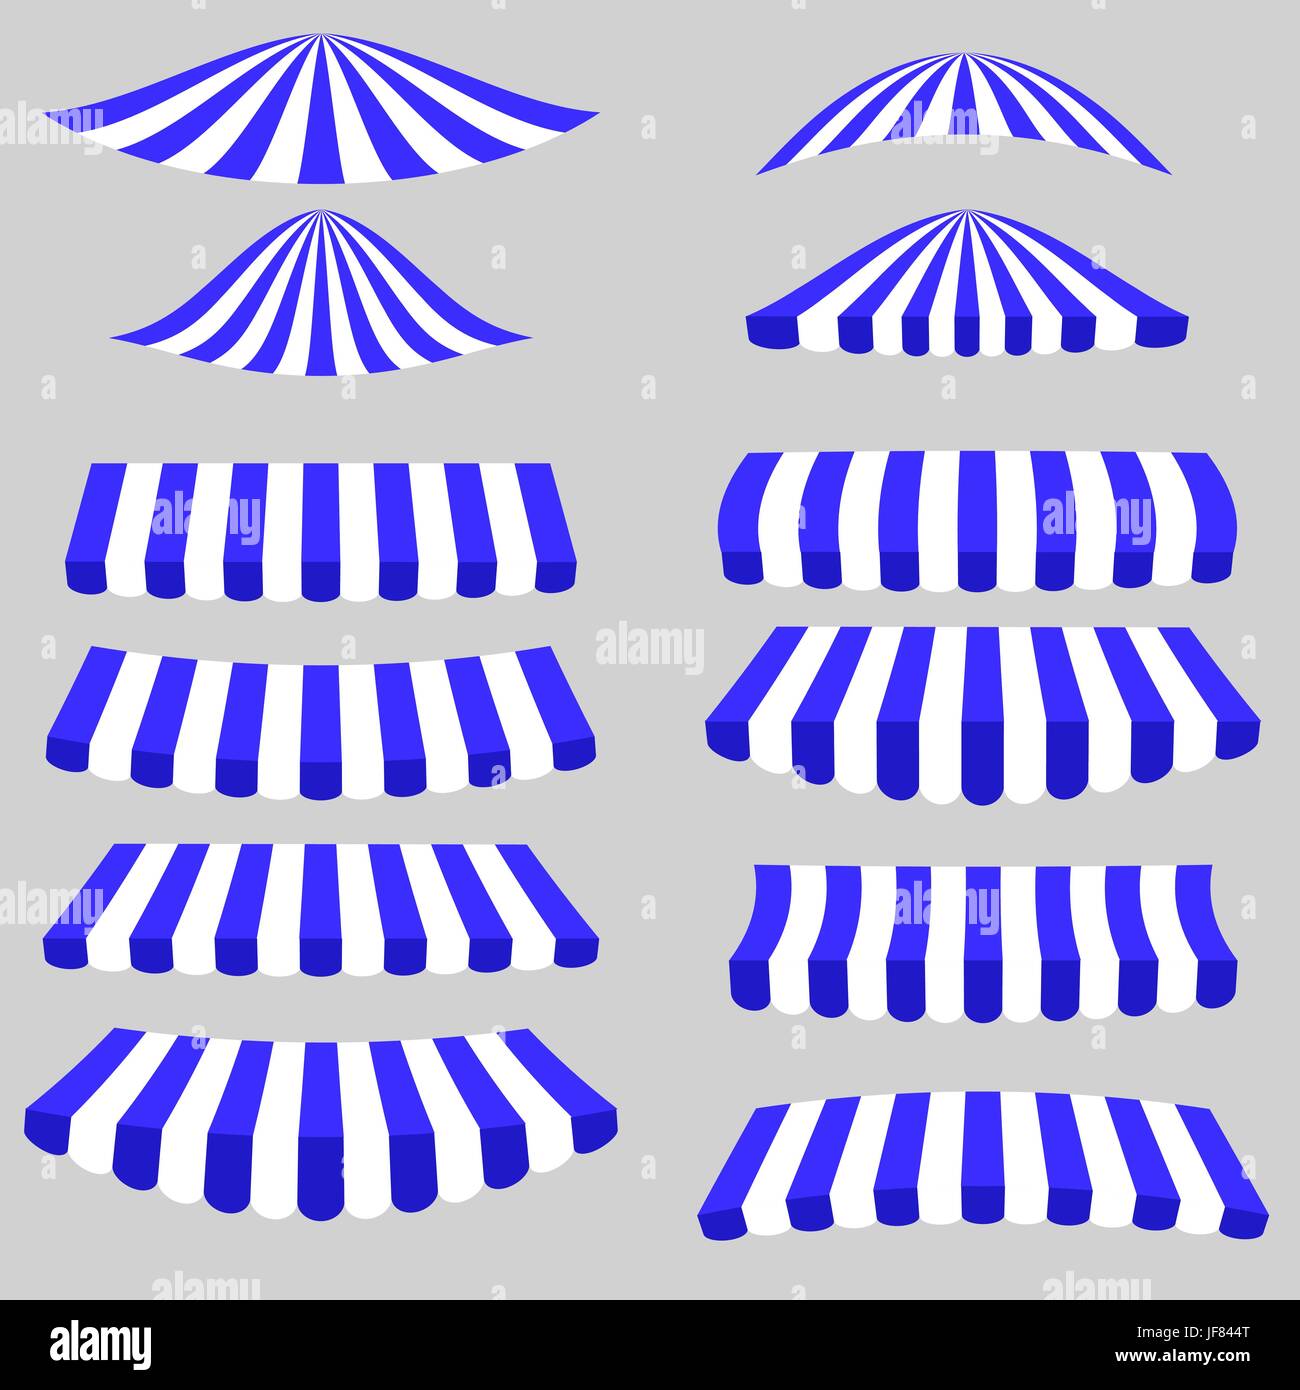 Blue White Tents Isolated on Grey Background. Stock Vector